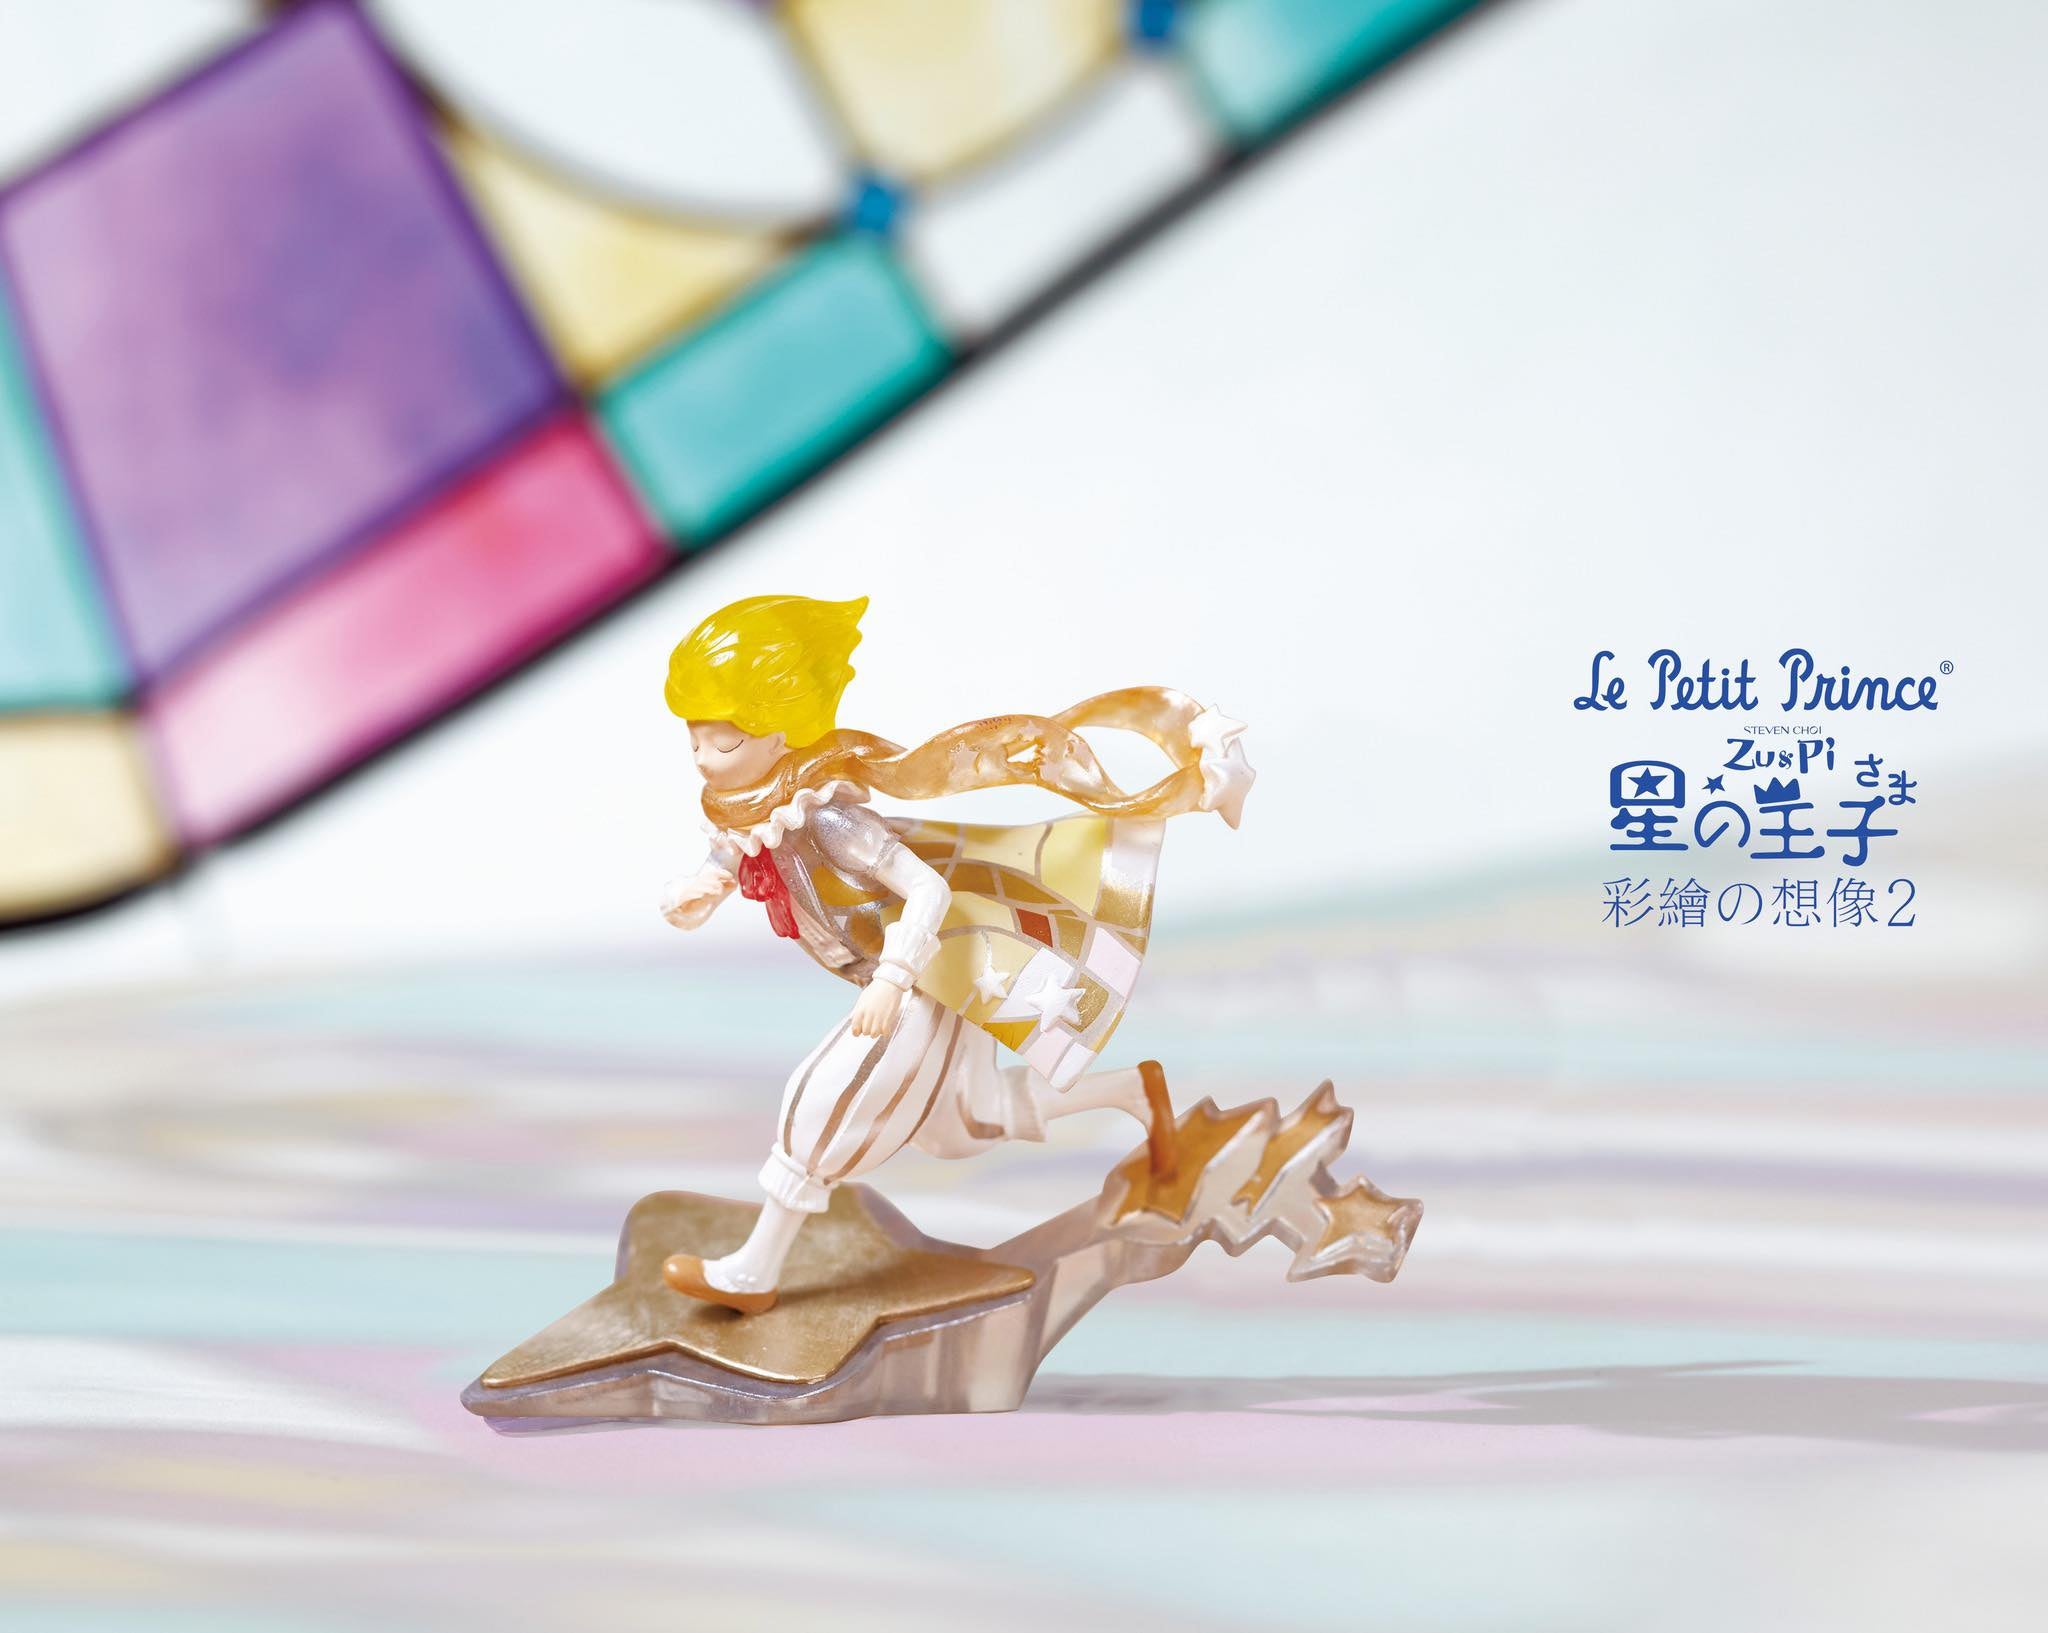 A blind box collector's edition featuring The Little Prince Vol. 4 - Stained Glass Special Edition by Zu & Pi. Includes 6 regular designs and 1 secret design. Limited art print included.